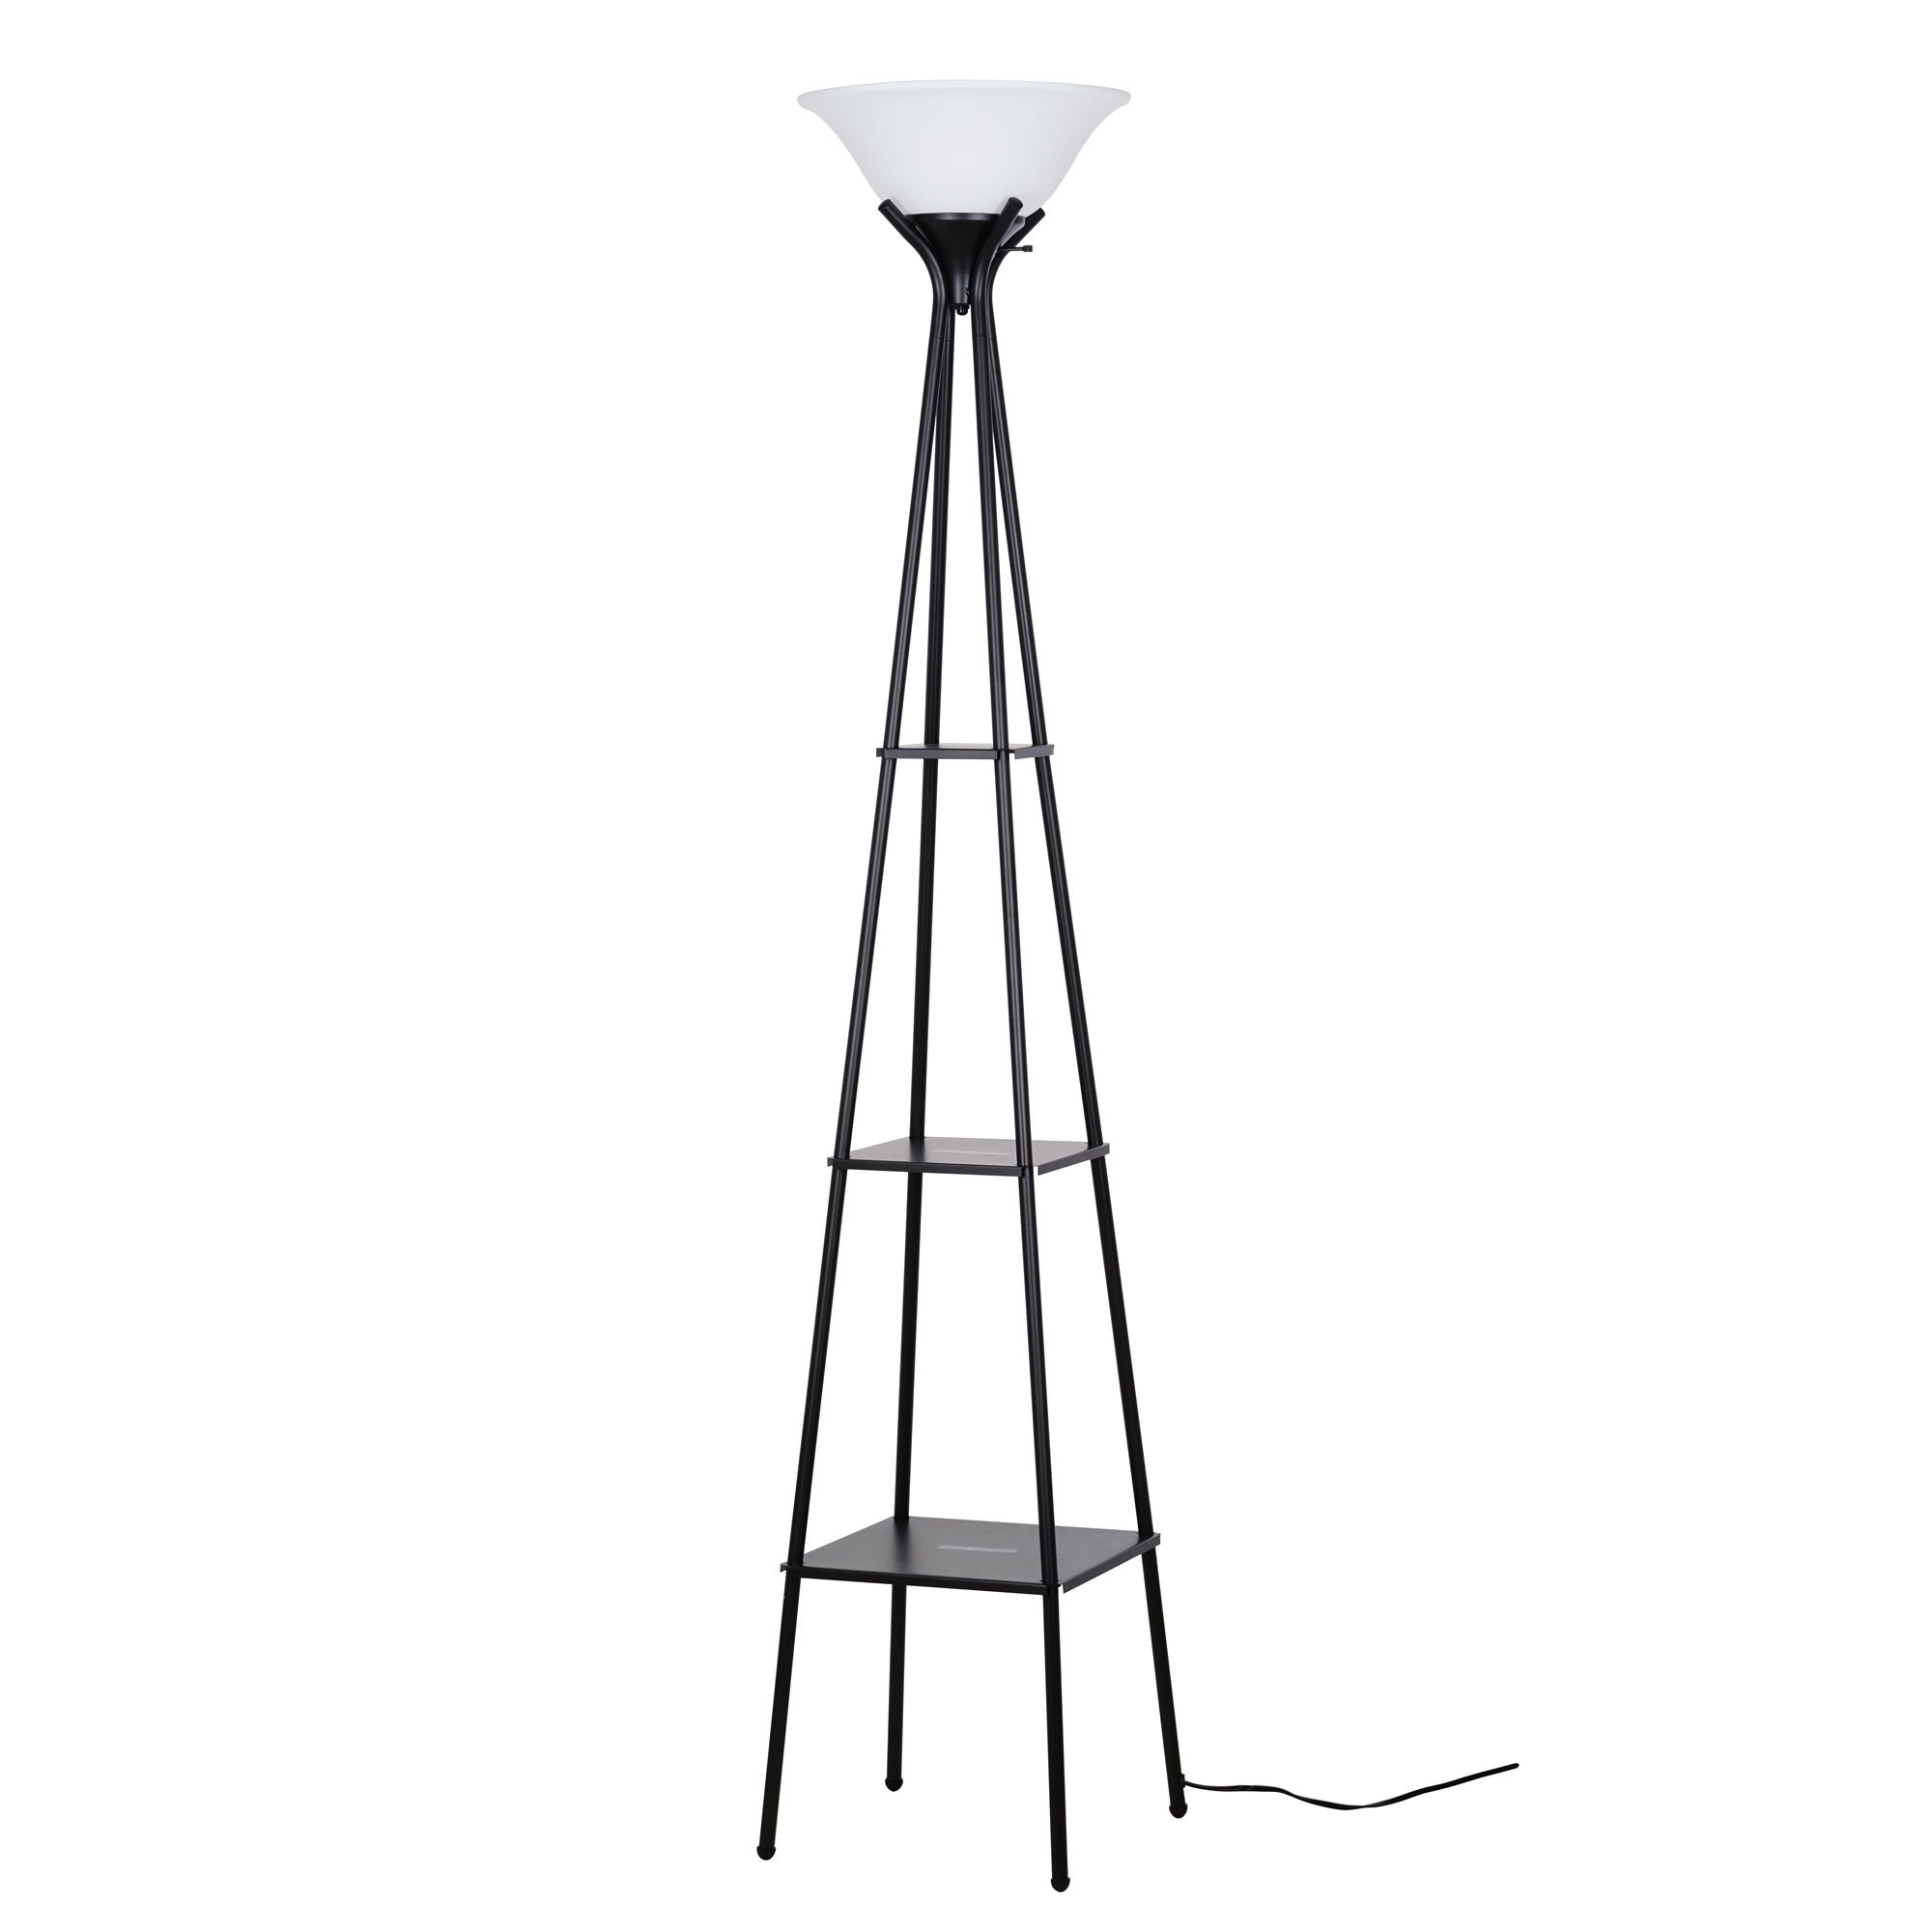 Mainstays 69" Metal Etagere Floor Lamp, Charcoal Finish - image 1 of 8